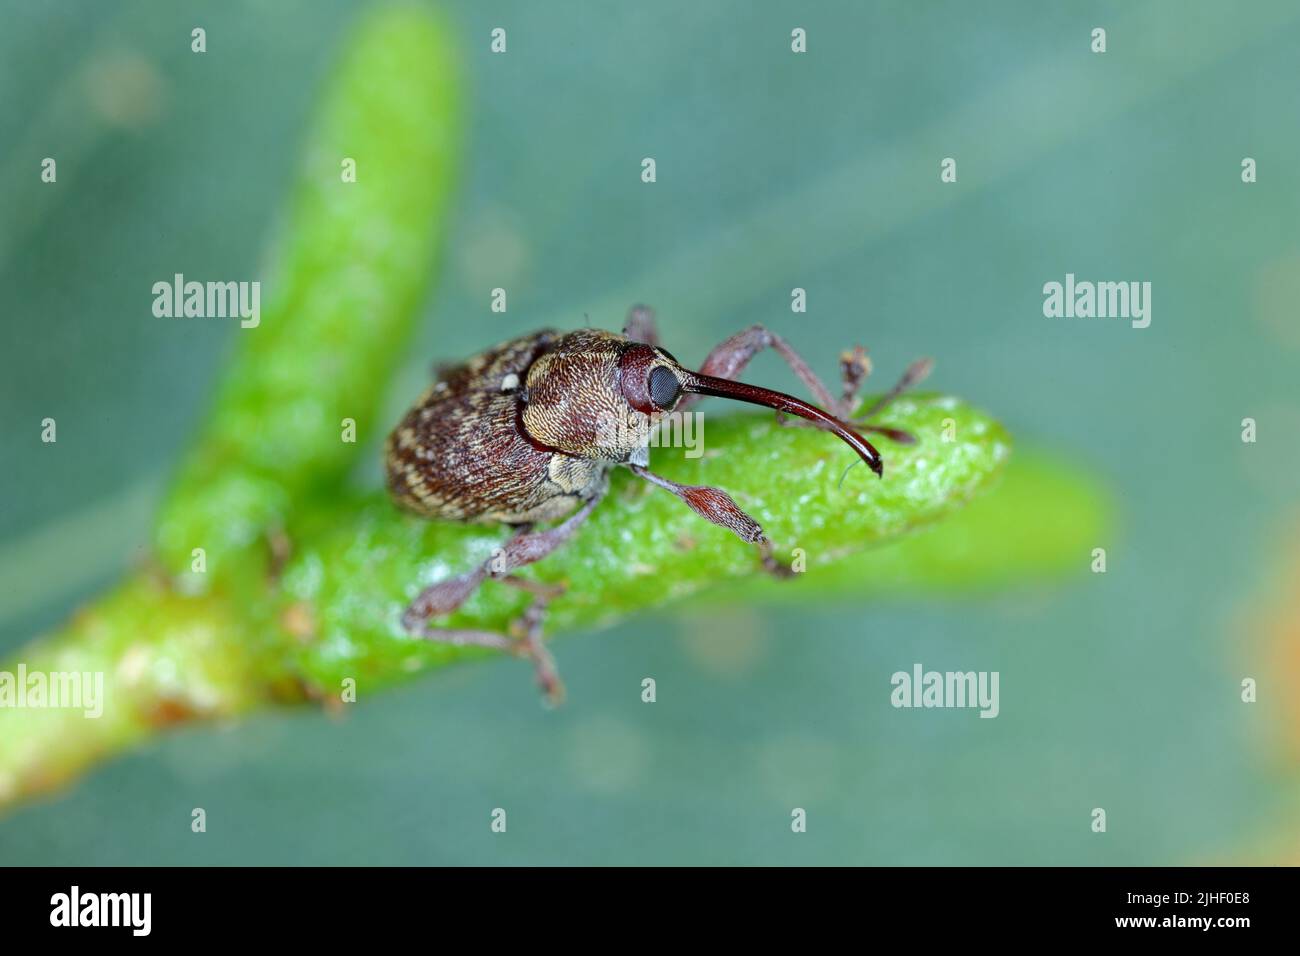 Curculio rubidus, Weevil from family Curculionide. Stock Photo